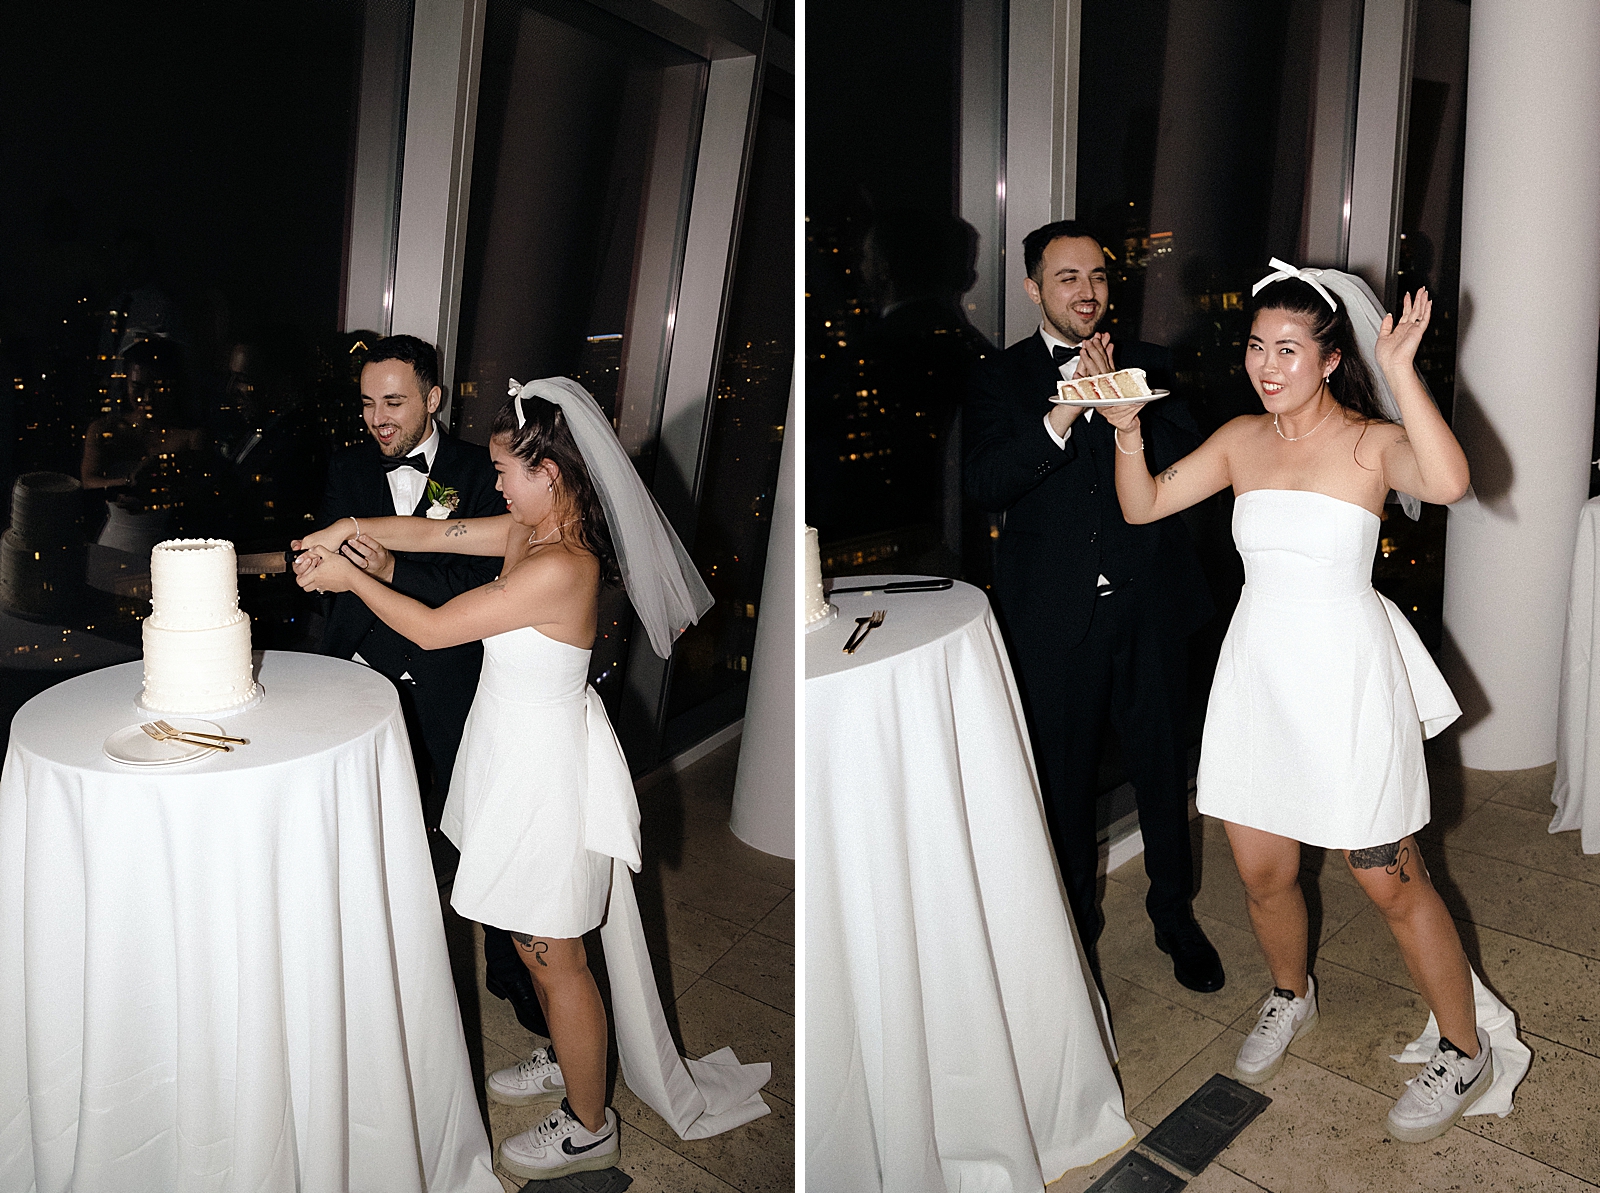 Left photo: Full shot of the bride and groom cutting their wedding cake. 
Right photo: Full shot of the bride looking very excited to be holding a slice of wedding cake.